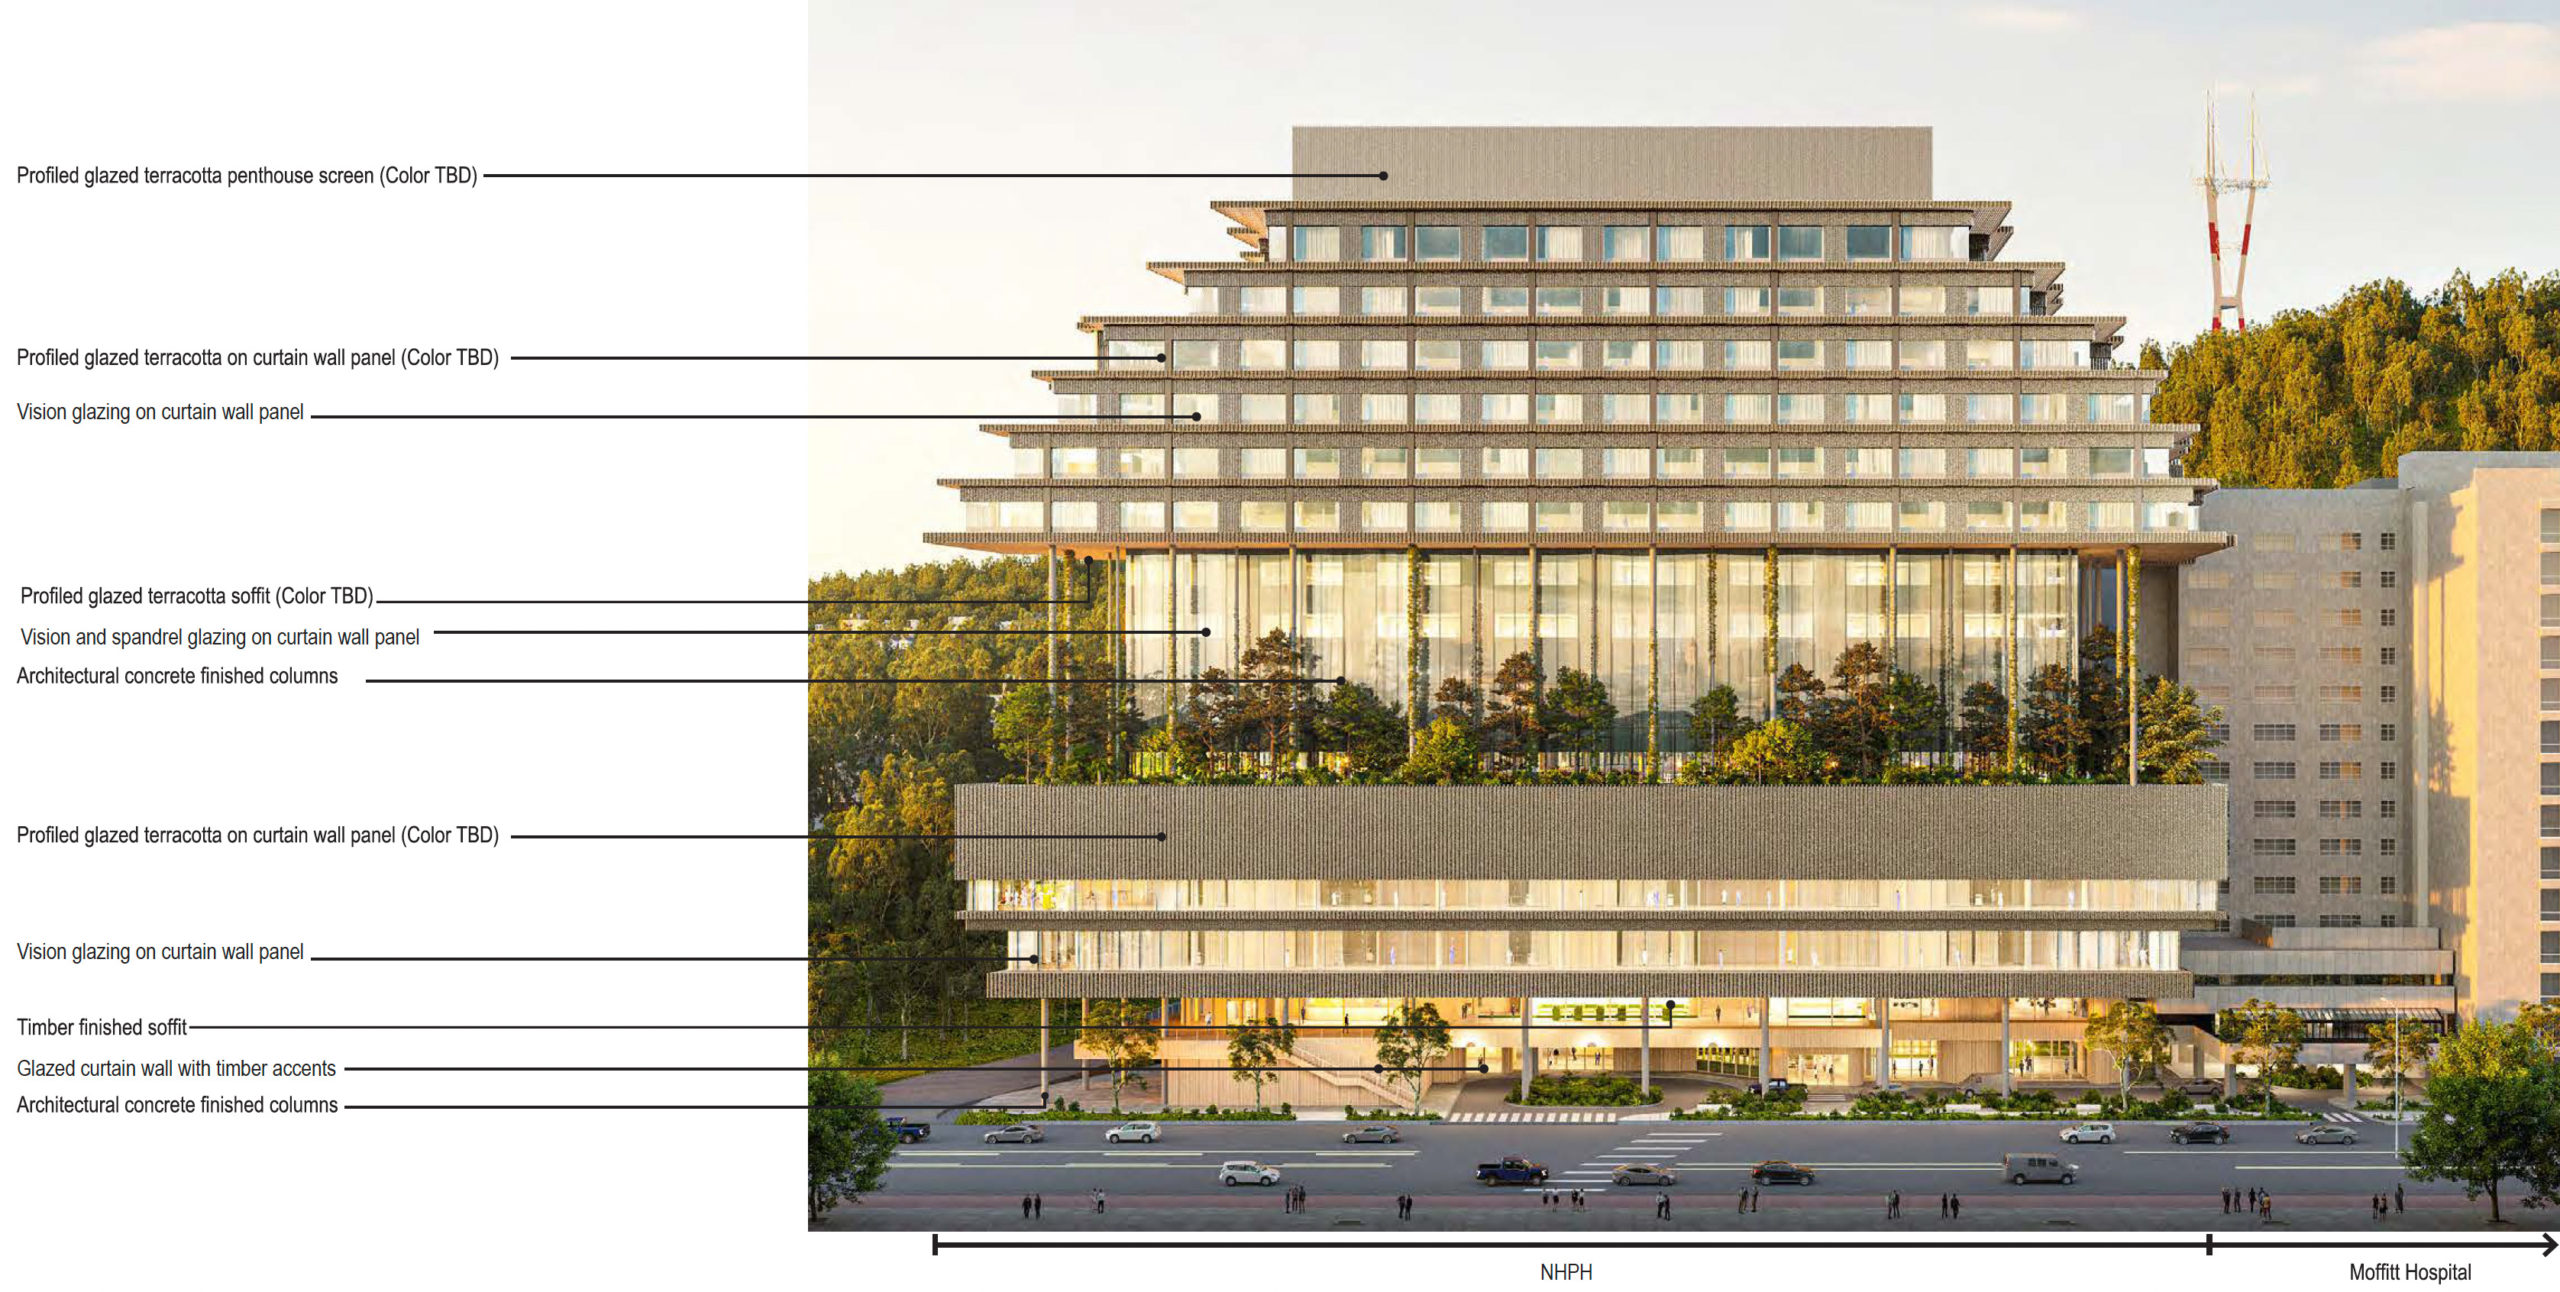 New Parnassus Hospital facade material breakdown, image courtesy UCSF